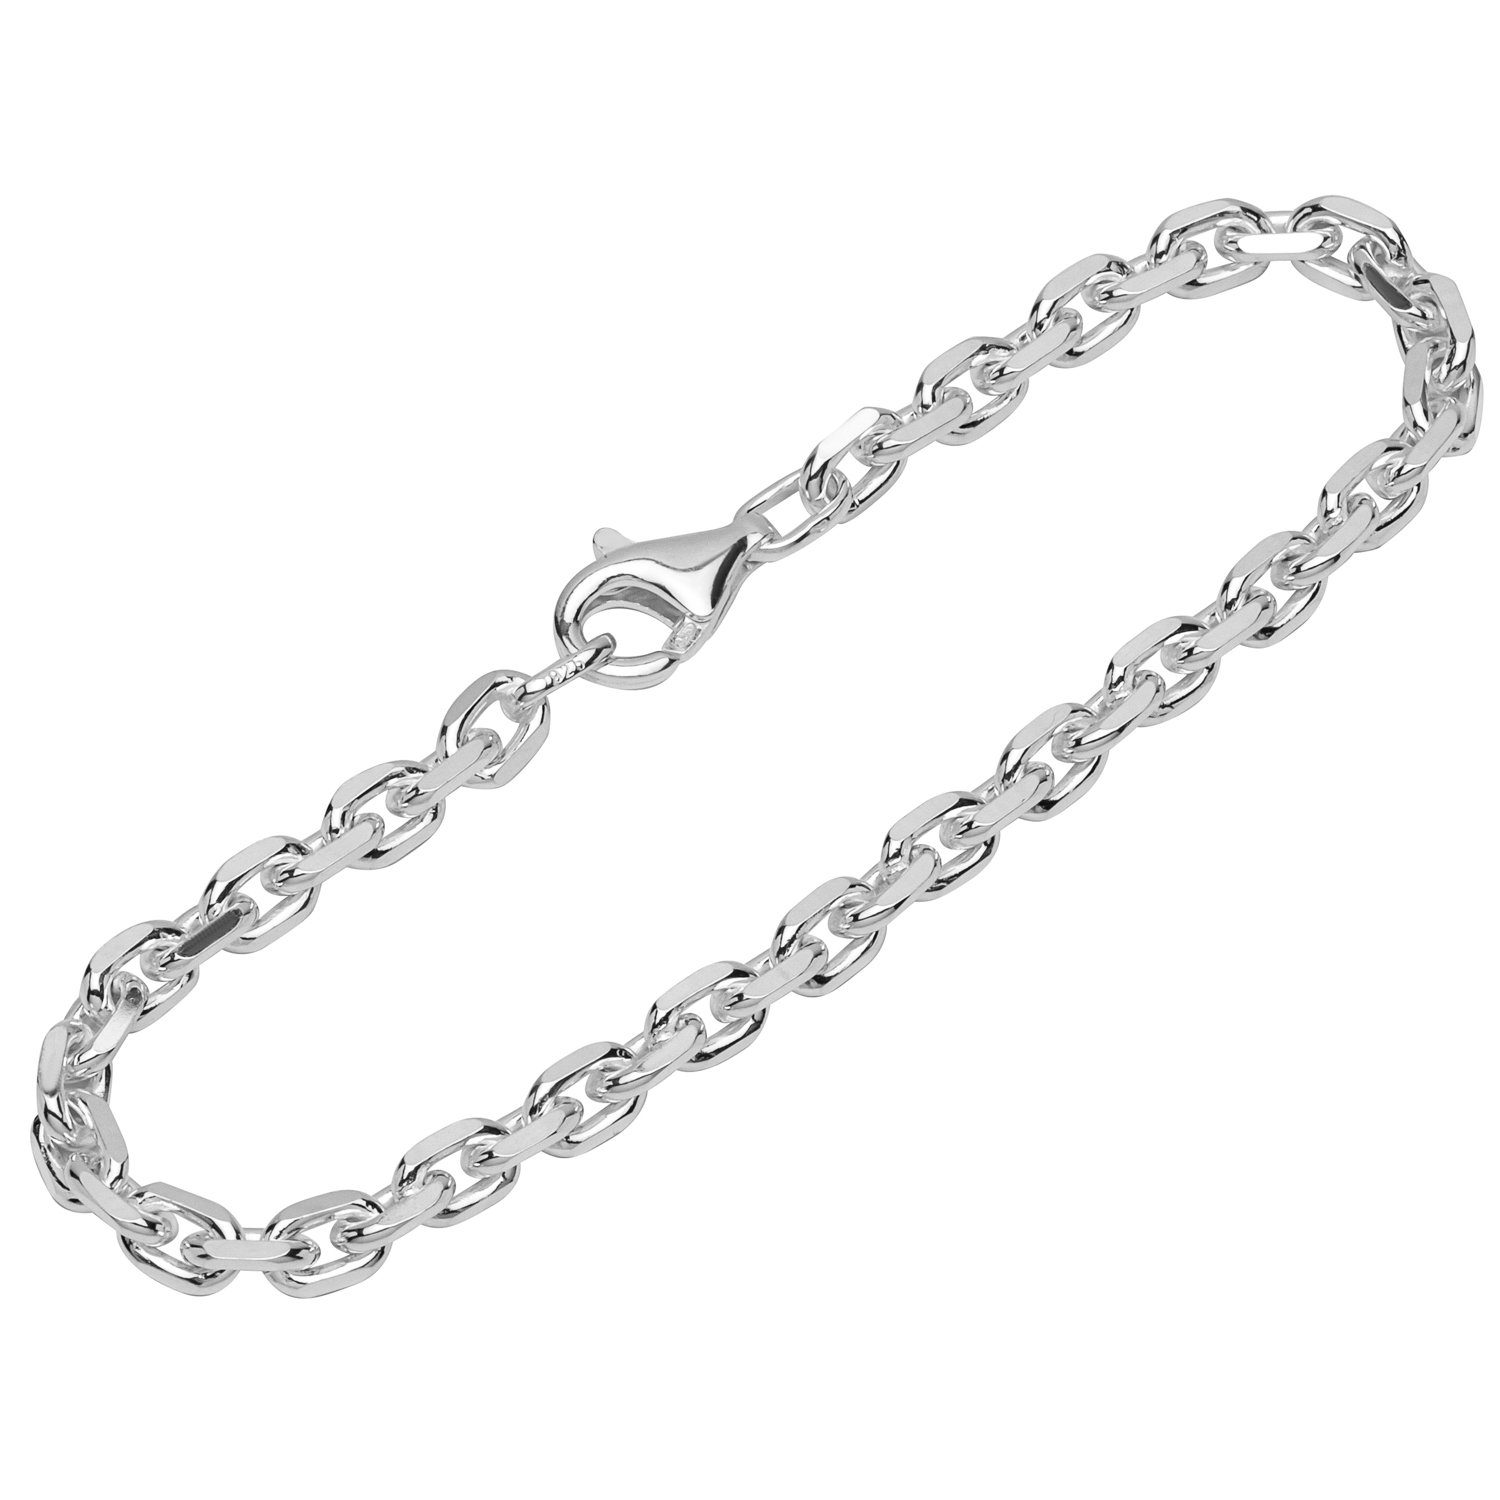 Stück), Ankerkette Made 925 fach NKlaus Sterling Armband Germany 19cm Silber Silberarmband (1 4 in